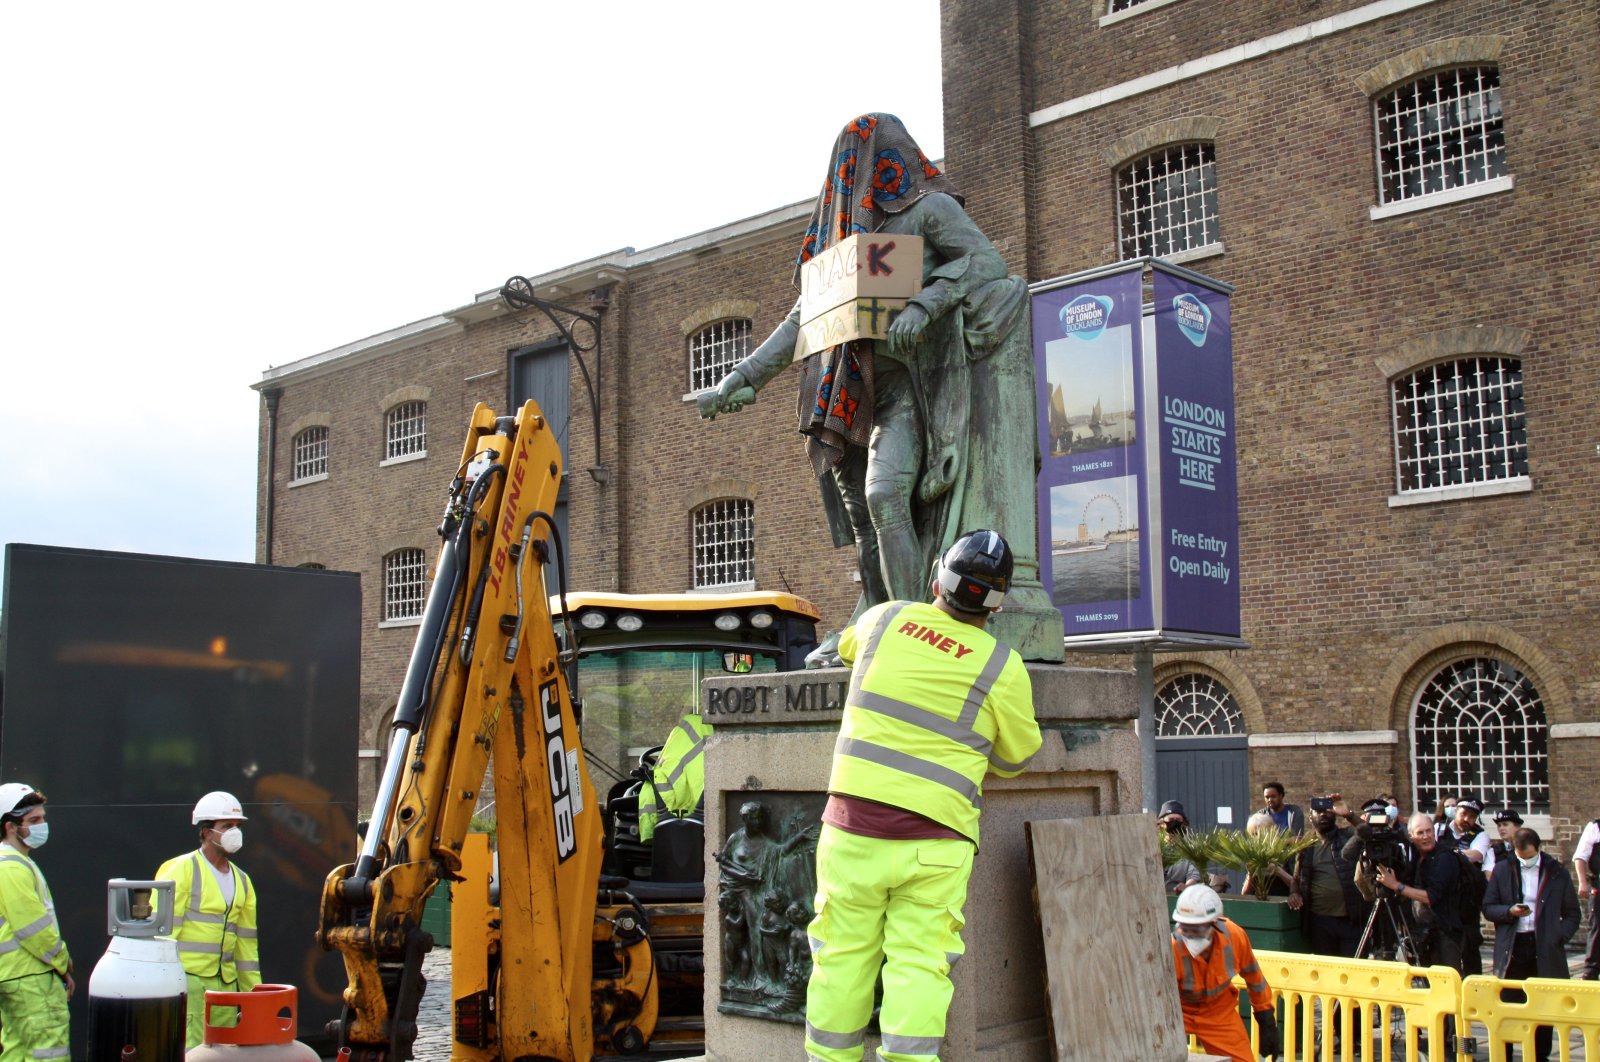 Workers remove the statue of Robert Milligan located outside the Museum of London Docklands near Canary Wharf, following the death of George Floyd who died in police custody in Minneapolis, London, Britain, June 9, 2020. (AA Photo)